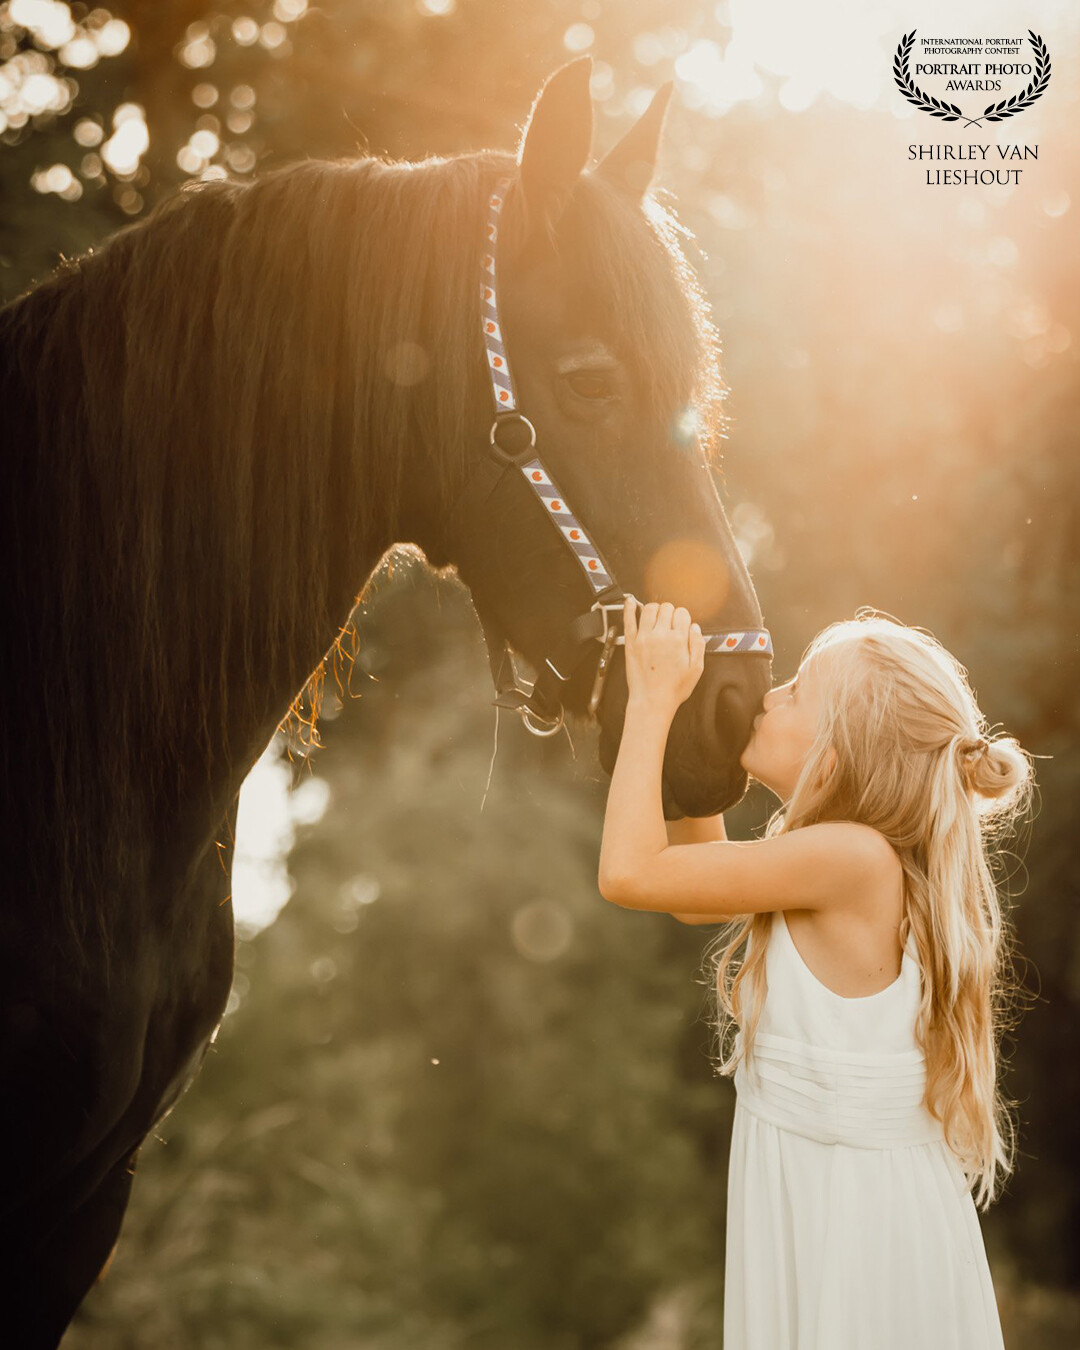 This lovely girl of 9 years old always wanted to make pictures with her absolute favorite horse breed: Friesians.  So her mother arranged this photoshoot with me and the neigbours of her inlaws happened to have a Friesian horse. This is one of the results, they look so pretty together!